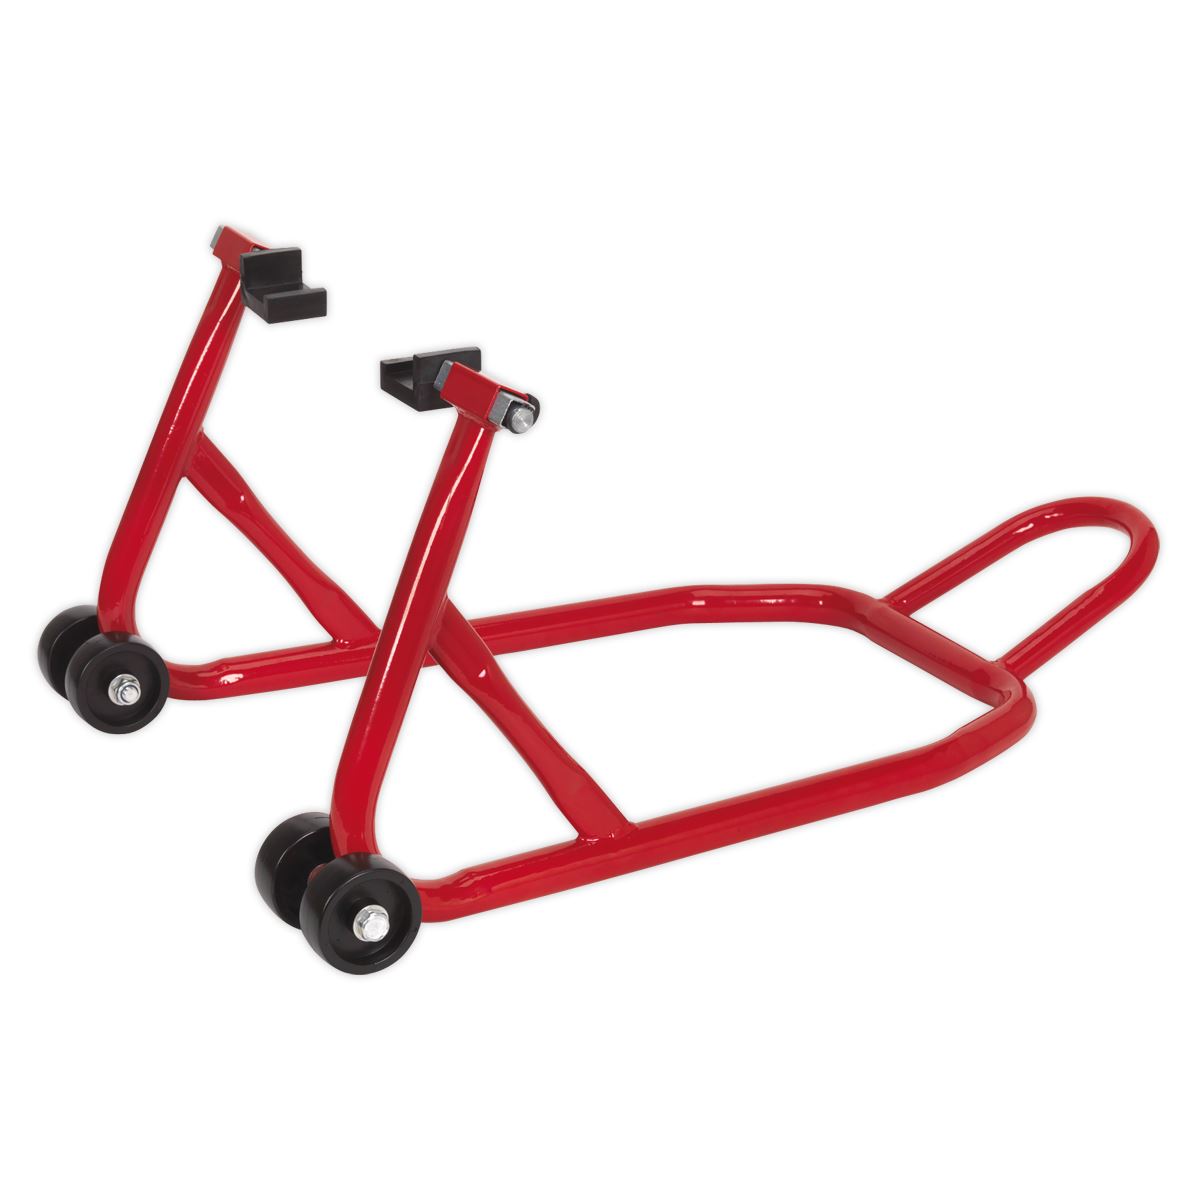 Sealey Universal Rear Paddock Stand with Rubber Supports